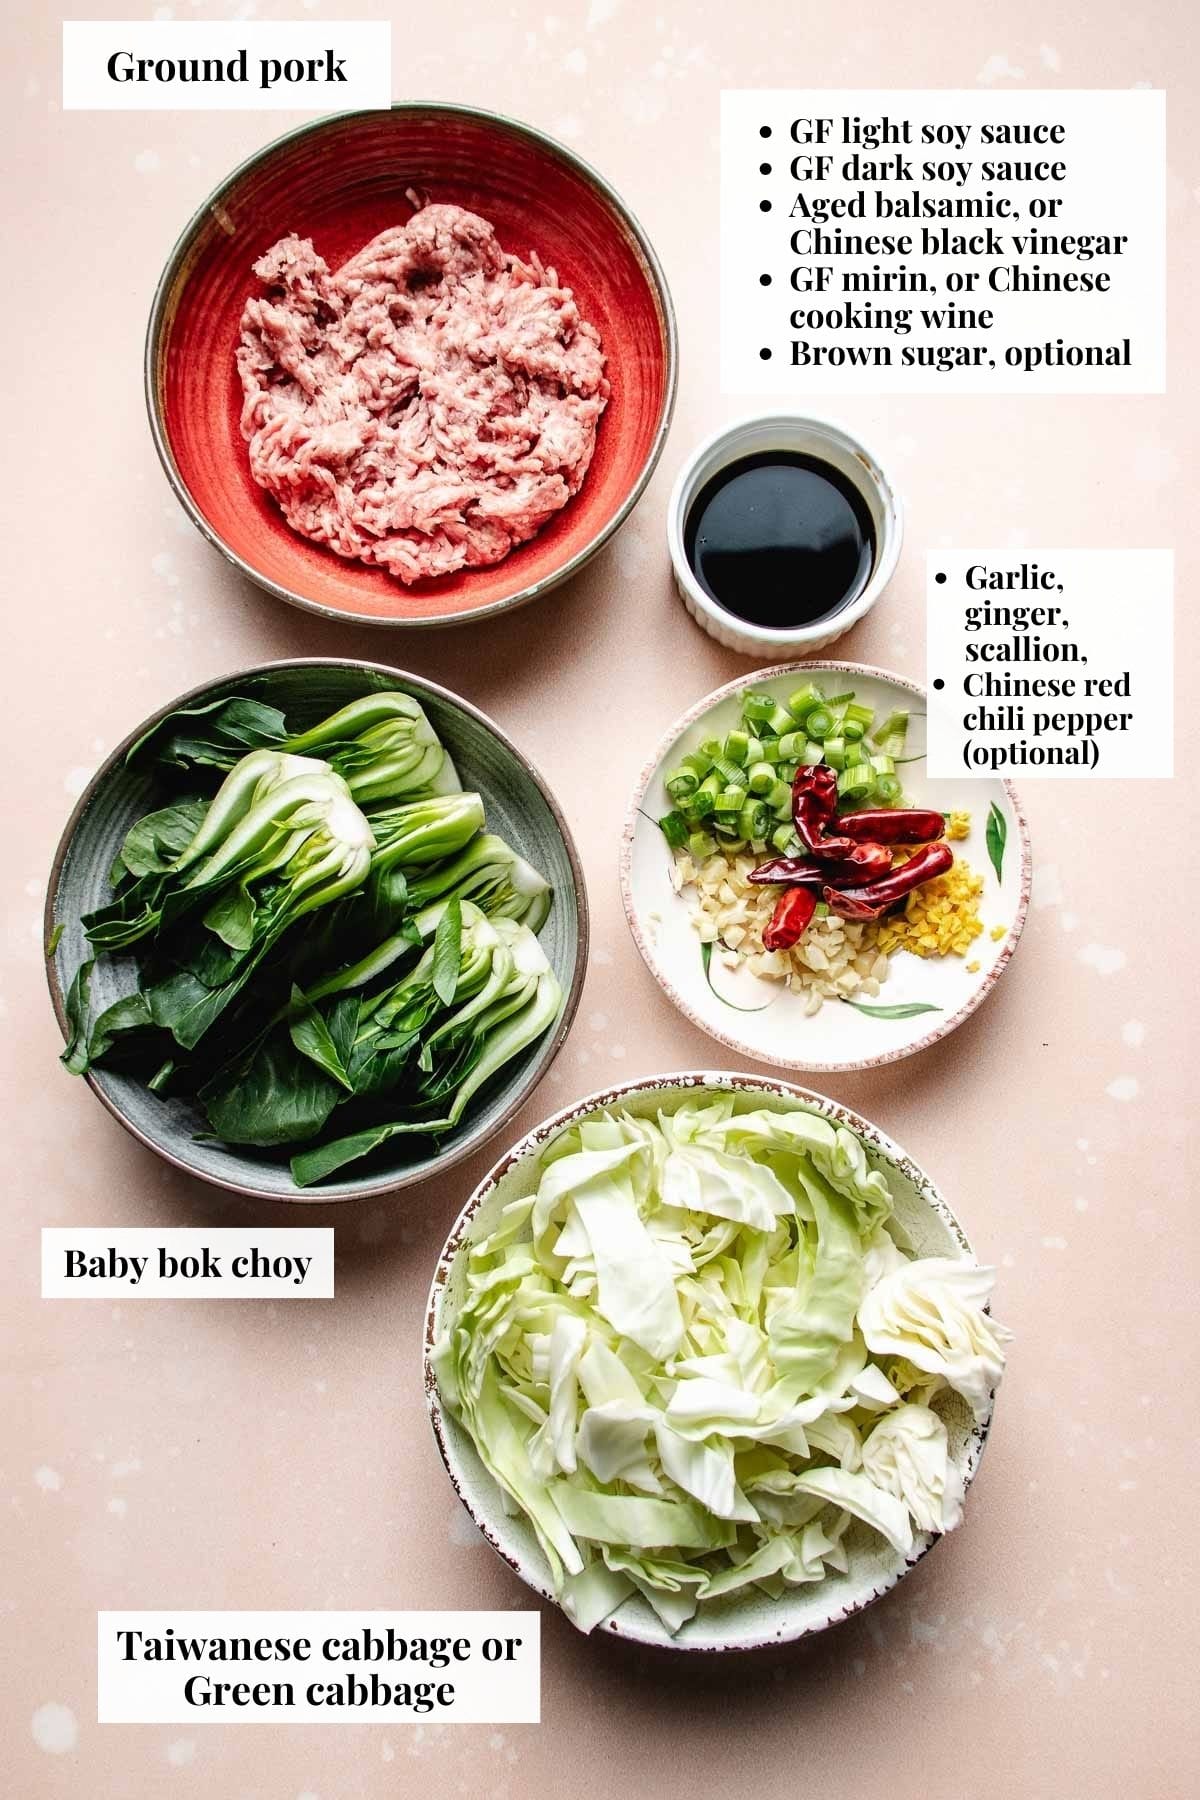 Photo shows ingredients used to make the pork cabbage stir fry dish.